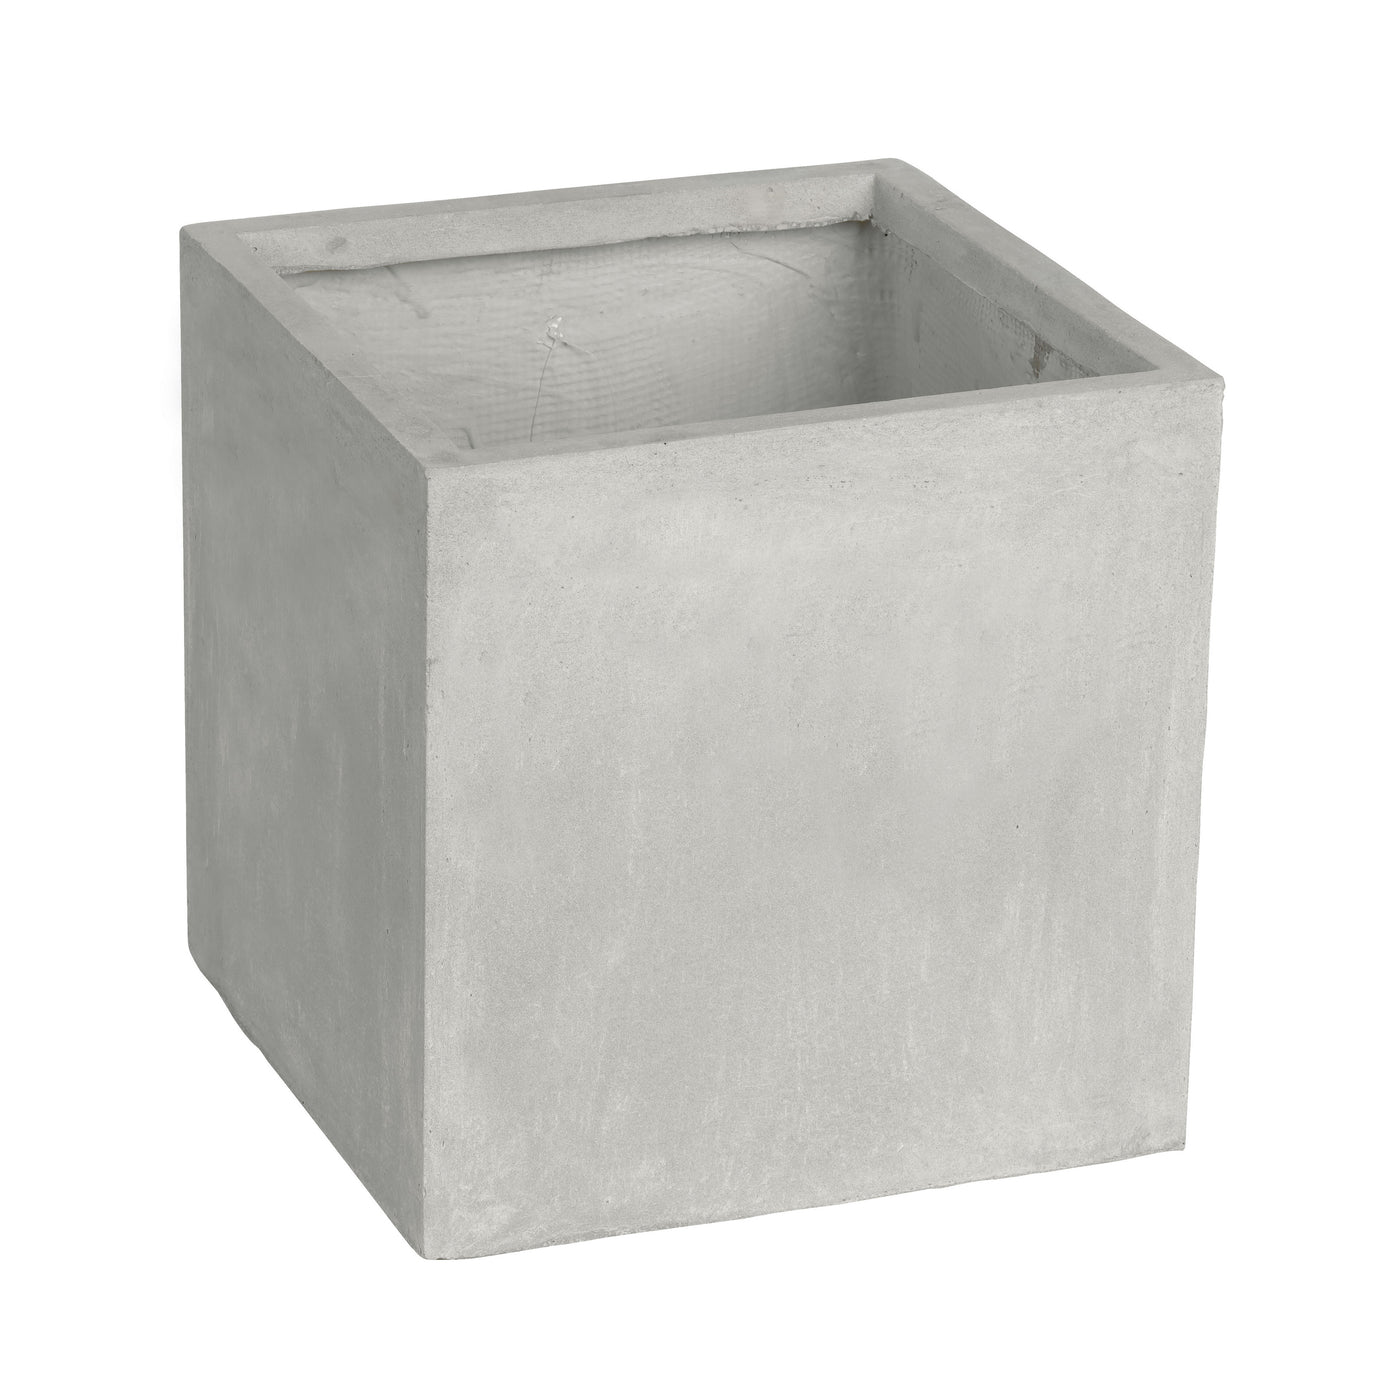 Handcrafted square stonecast planter in light grey